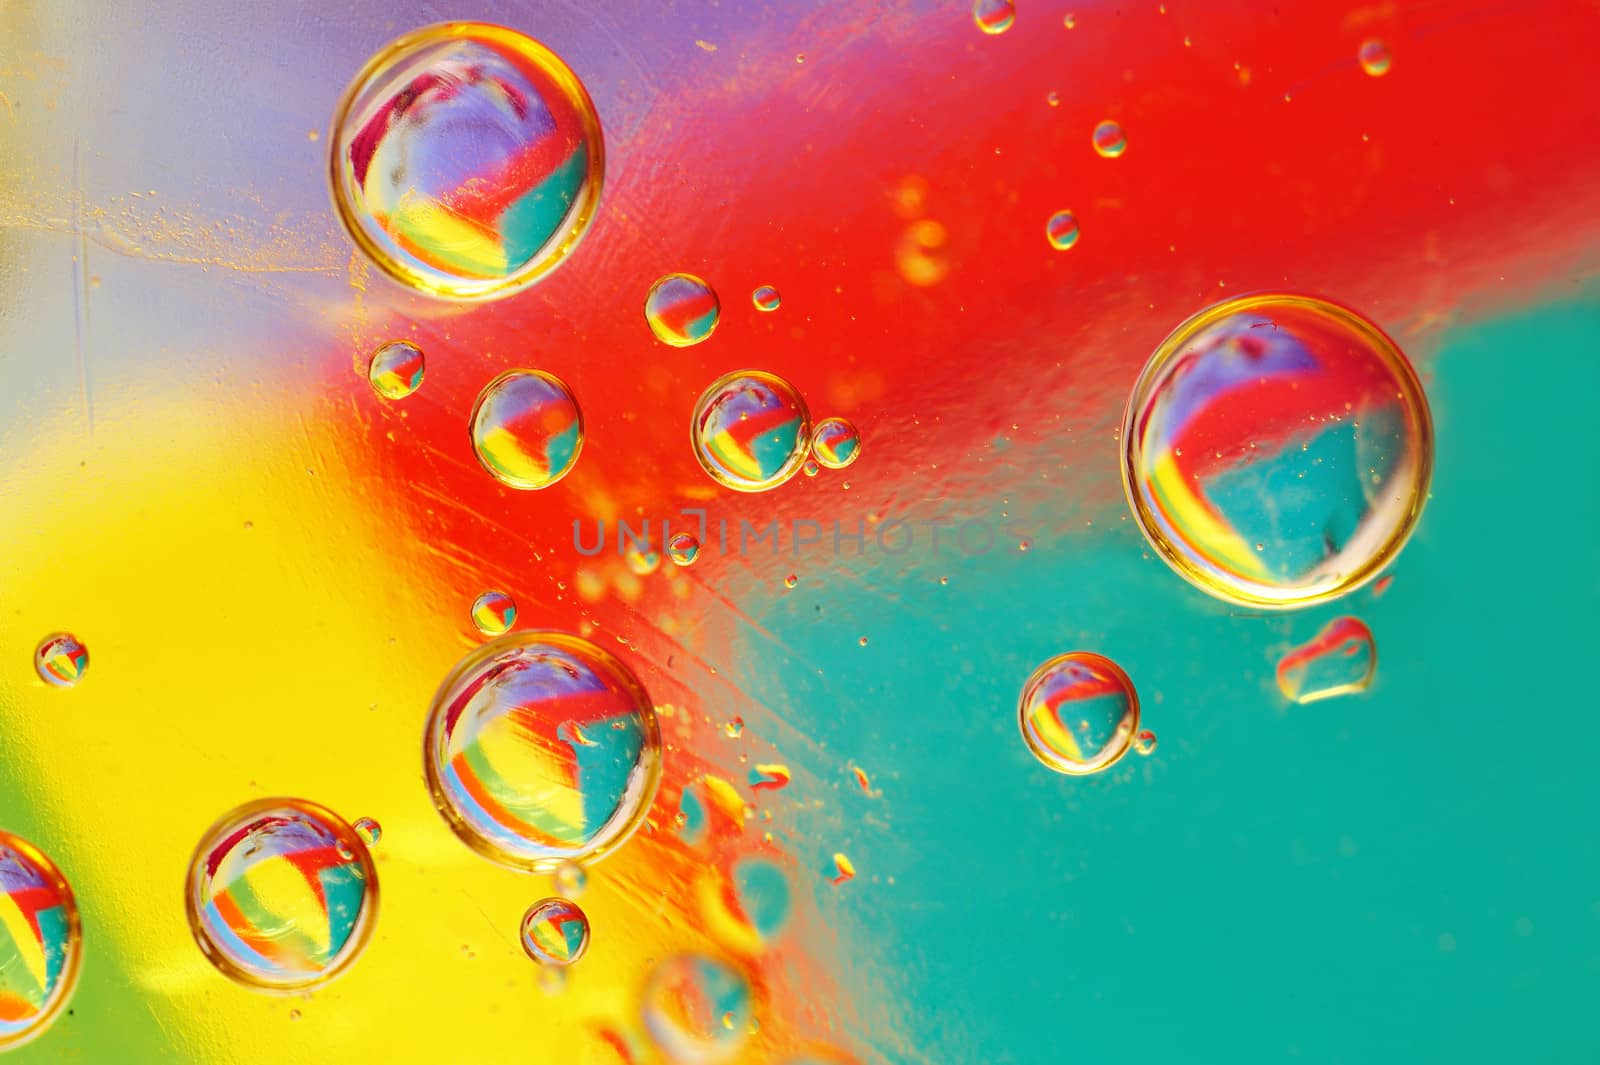 Oil bubbles by mady70